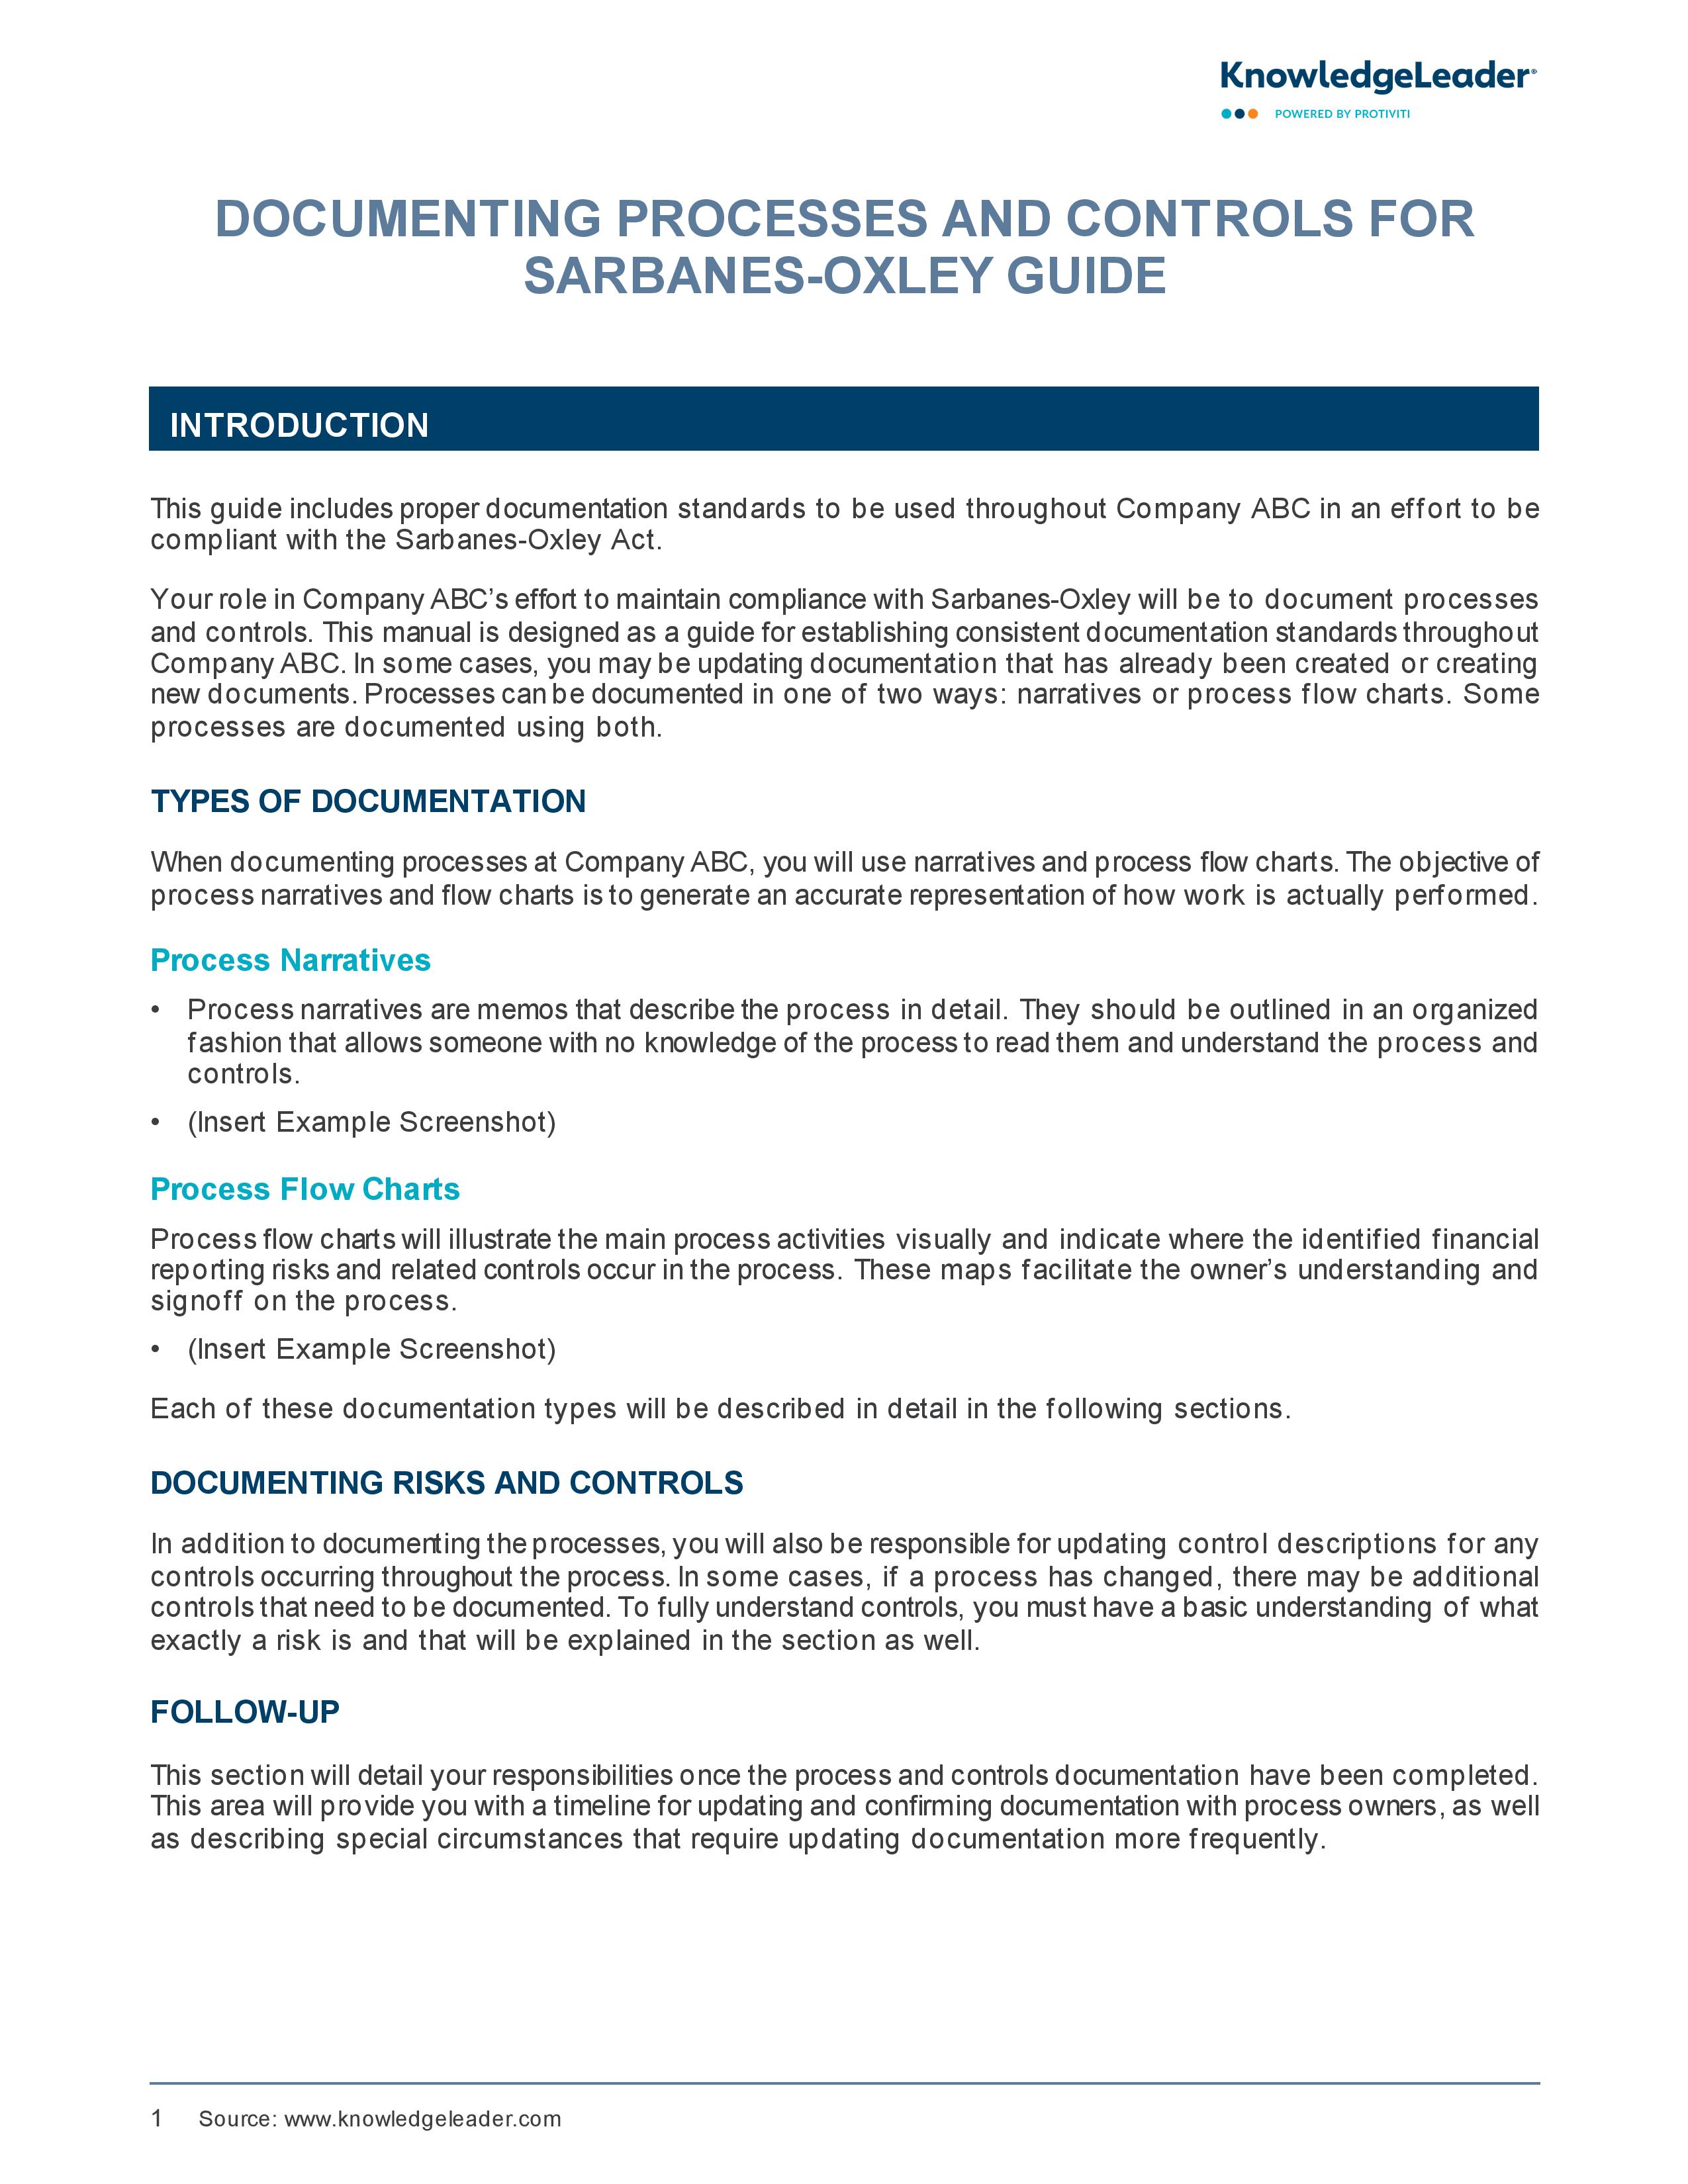 screenshot of the first page of Documenting Processes and Controls for Sarbanes-Oxley Guide